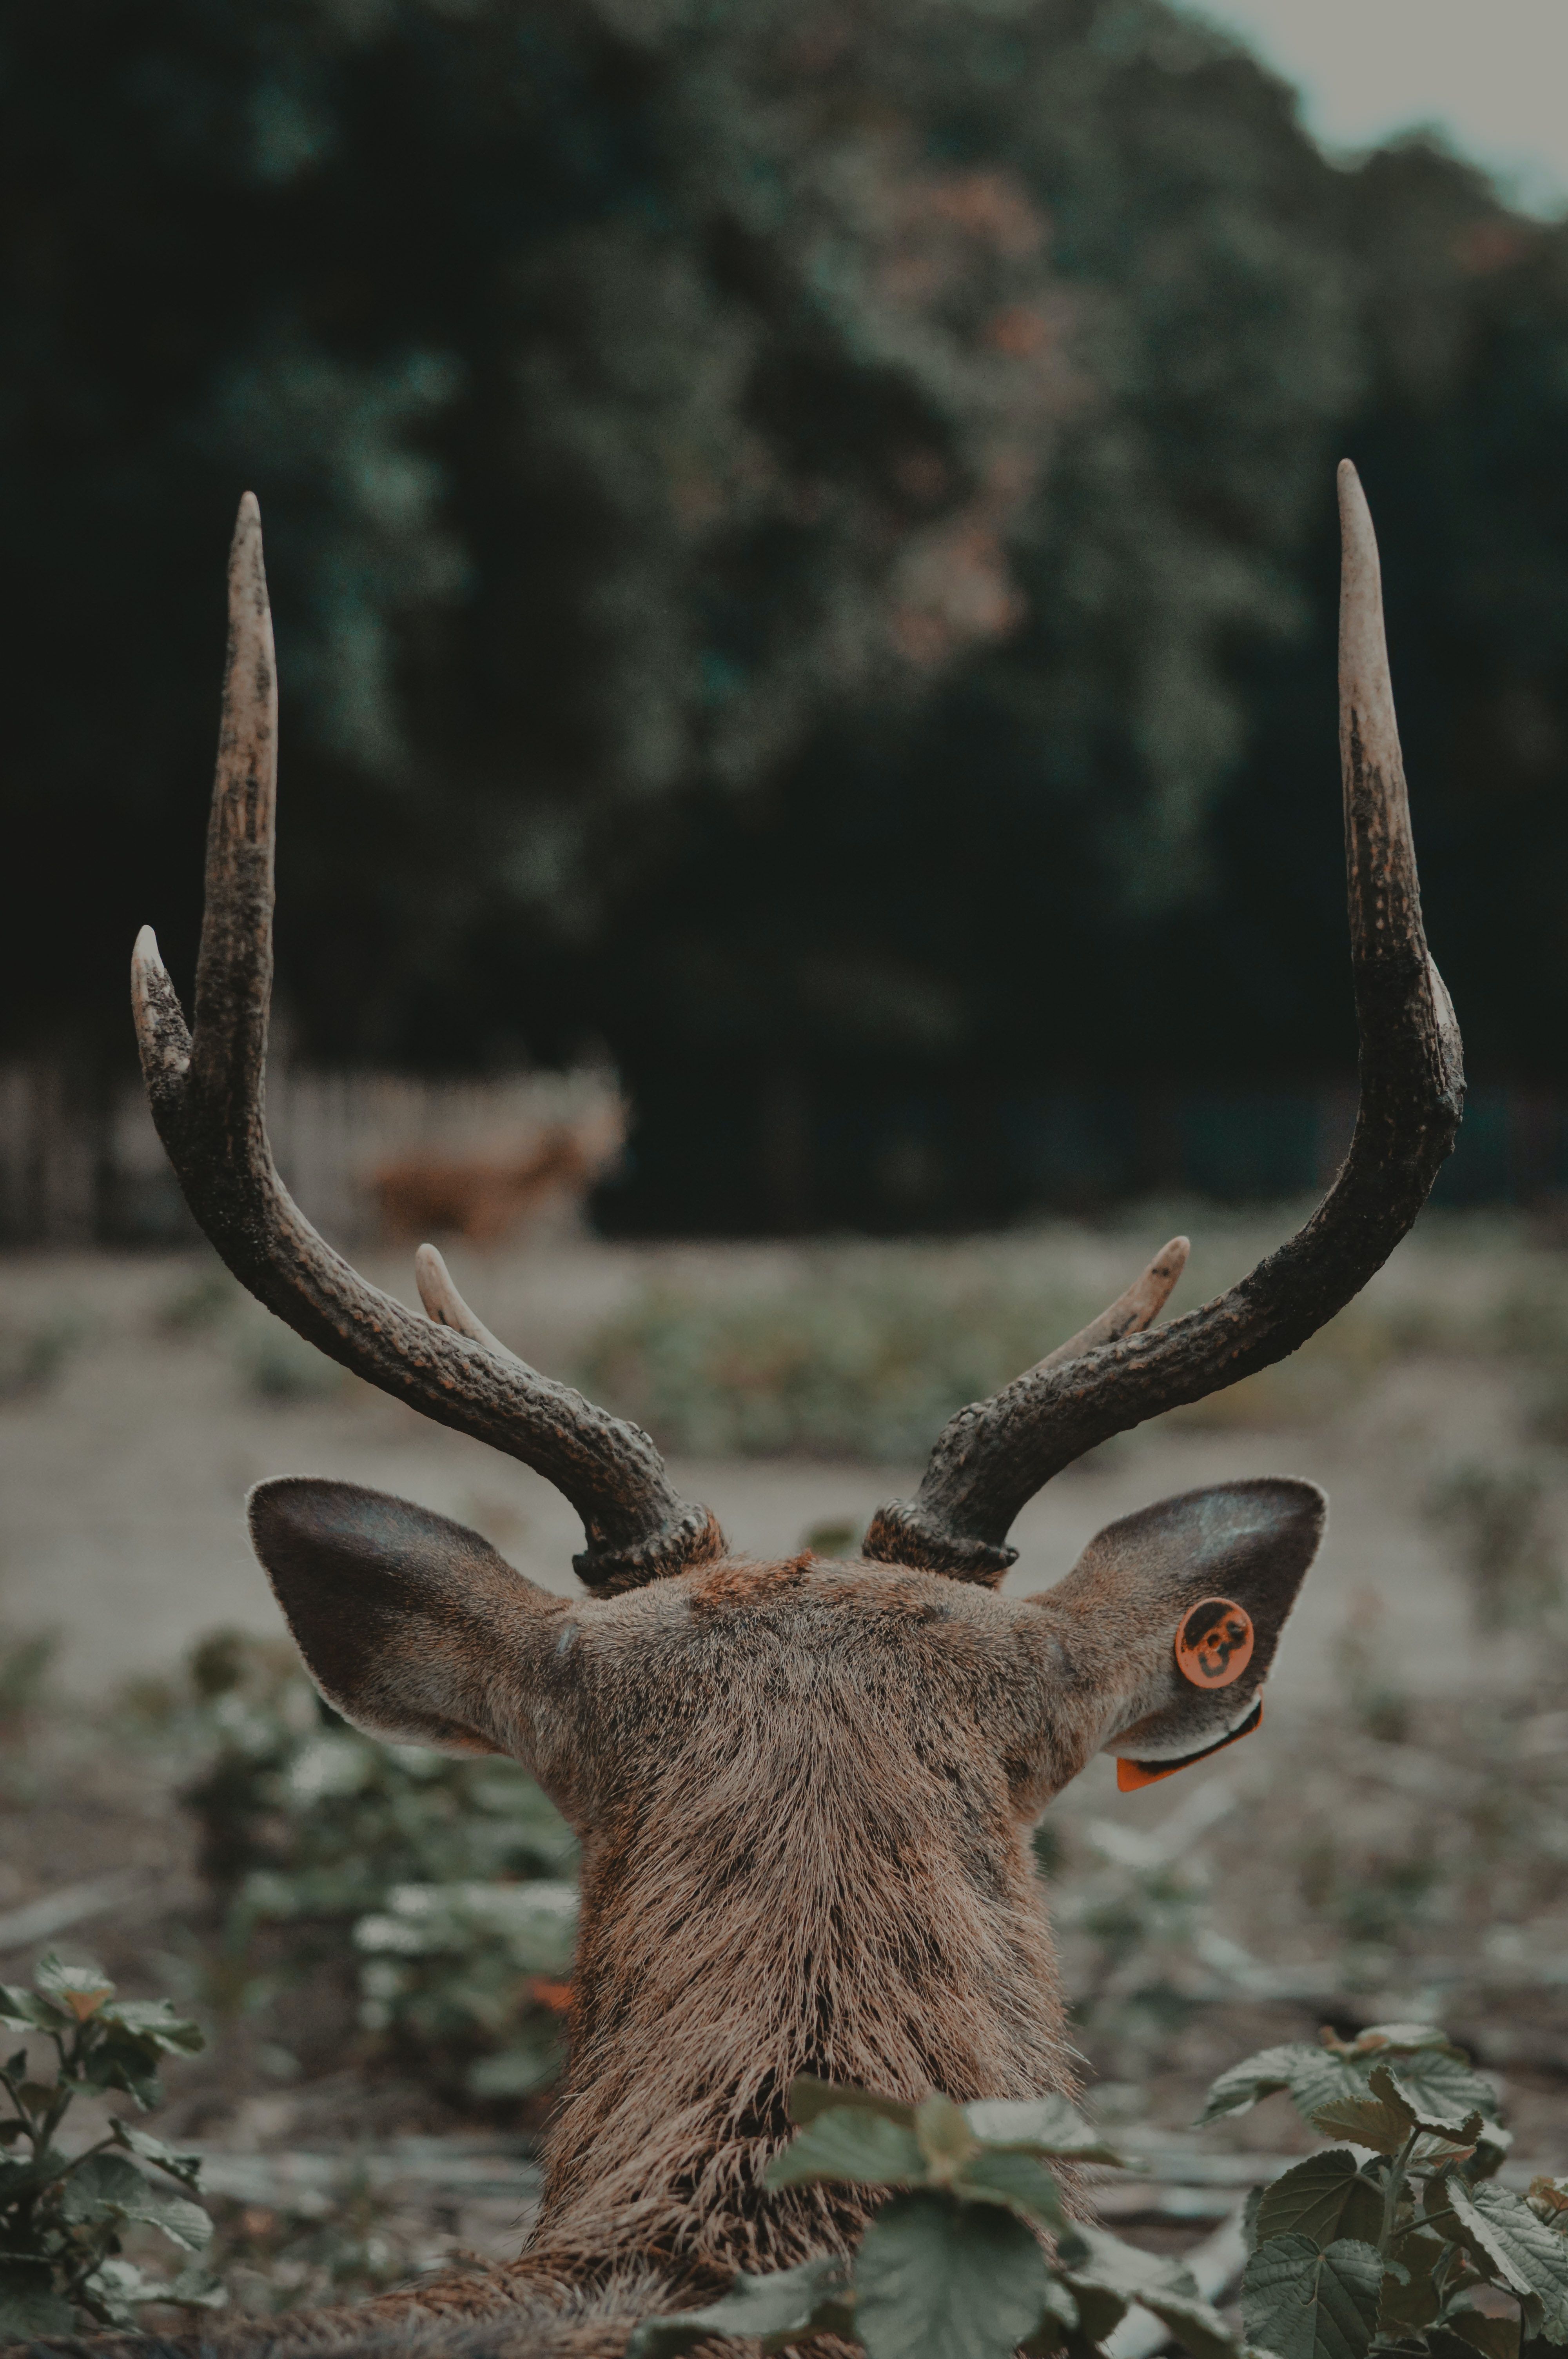 A deer with big antlers looks back at the camera. - Deer